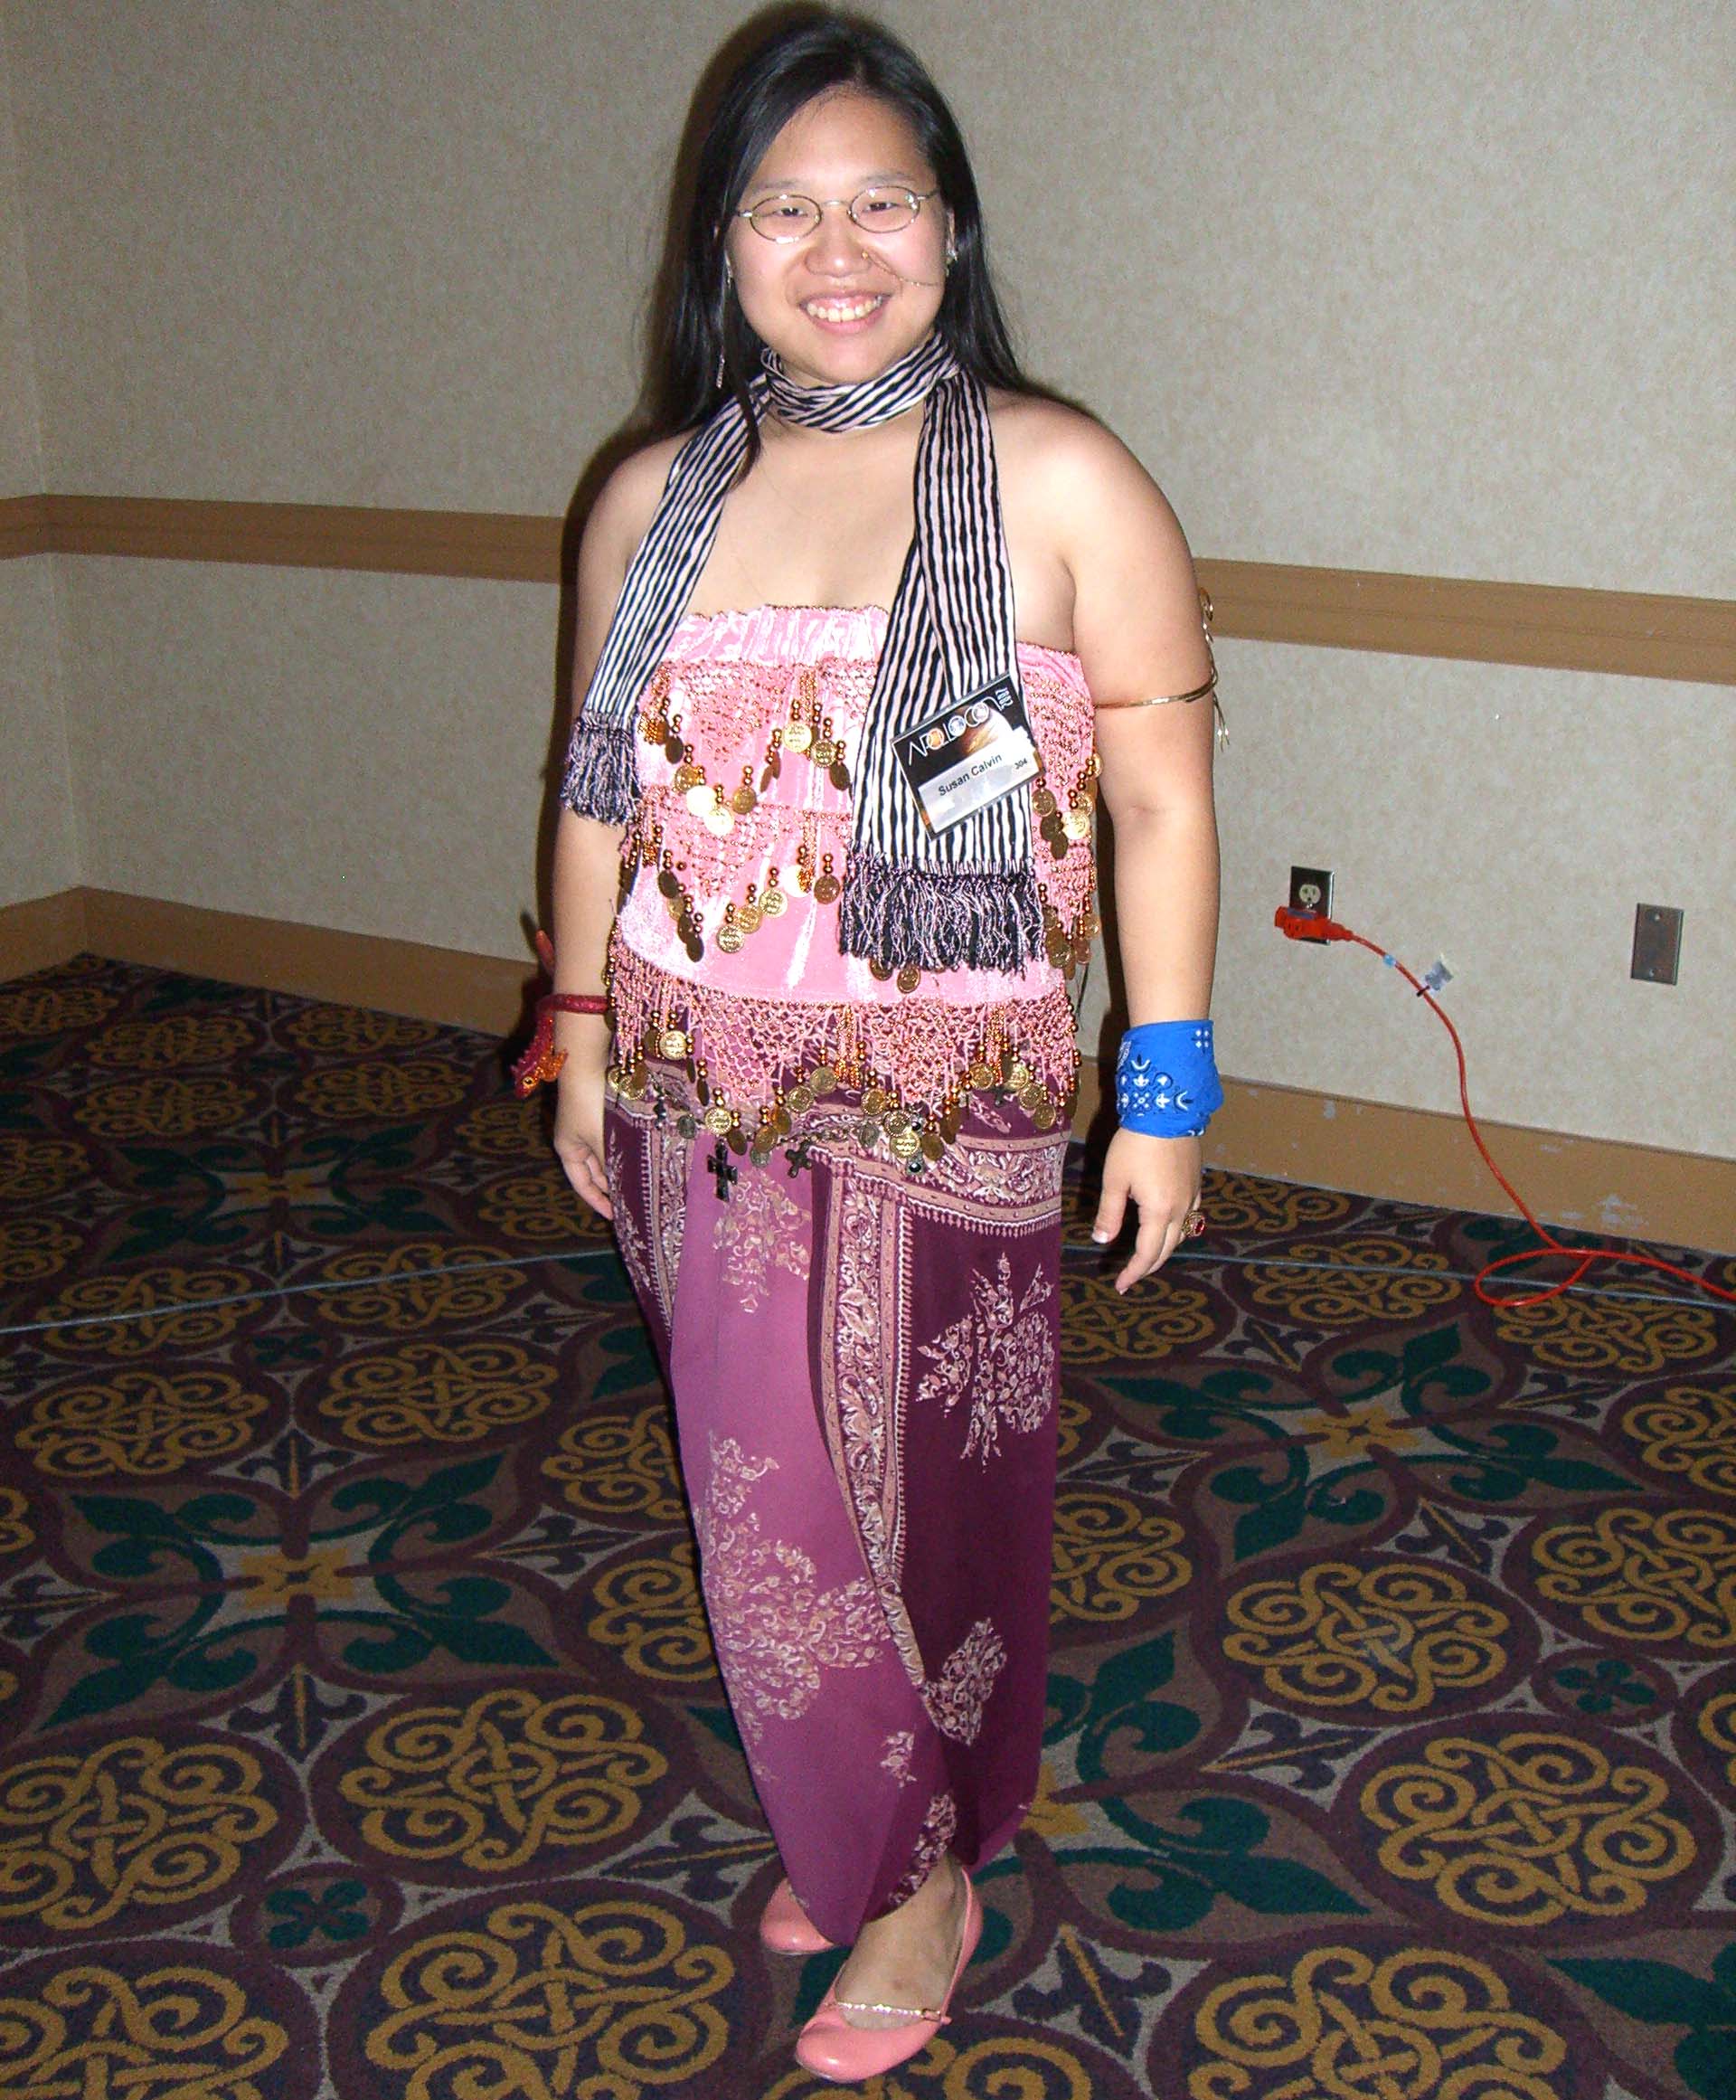 Susan in a purple Middle Eastern-themed outfit at ApolloCon 2007